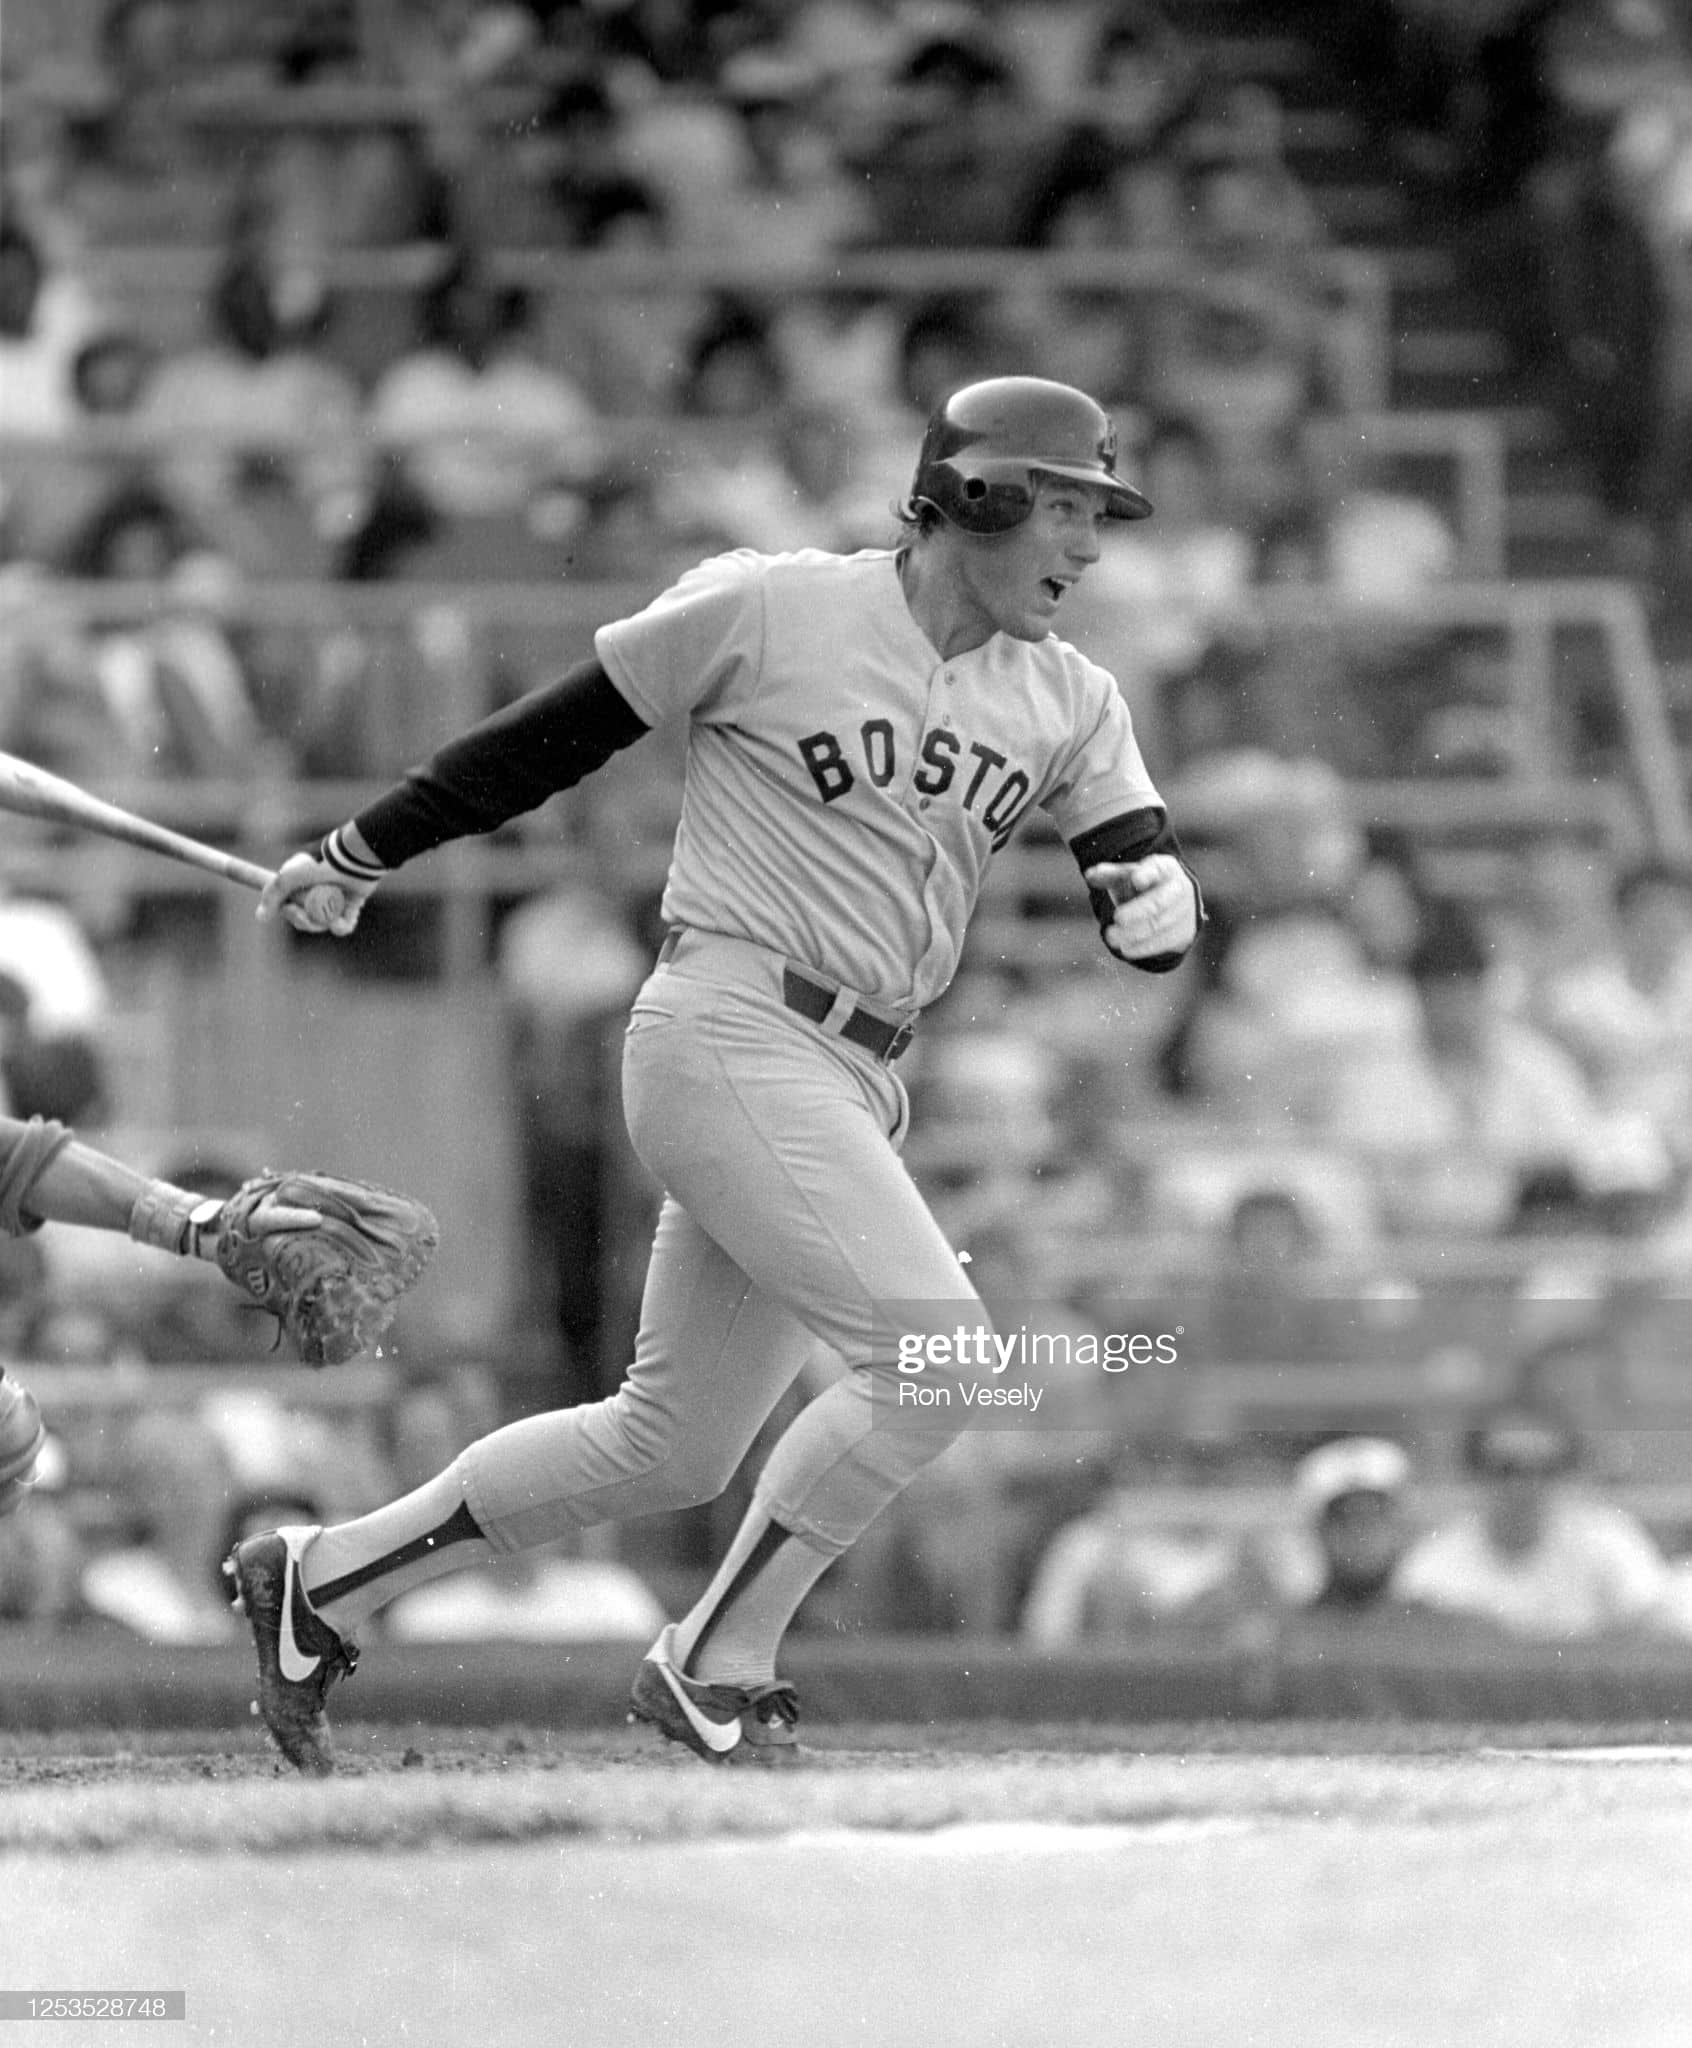 red sox catcher rich gedman batting during the 1985 season